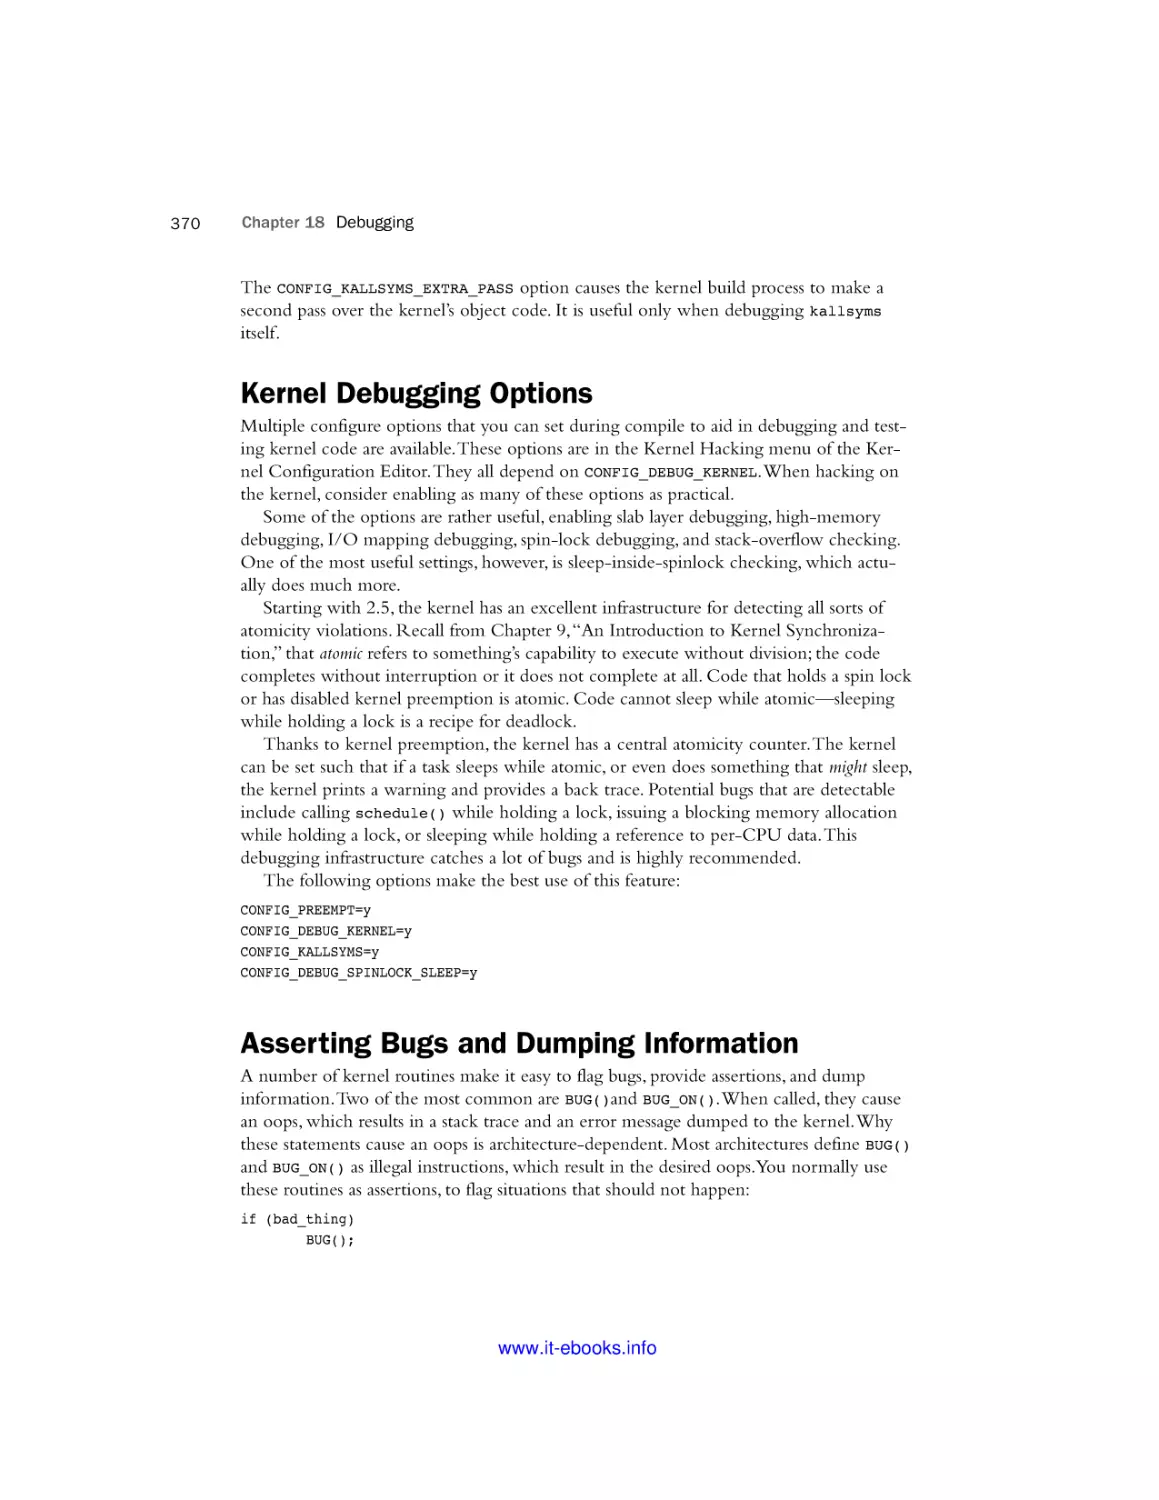 Kernel Debugging Options
Asserting Bugs and Dumping Information